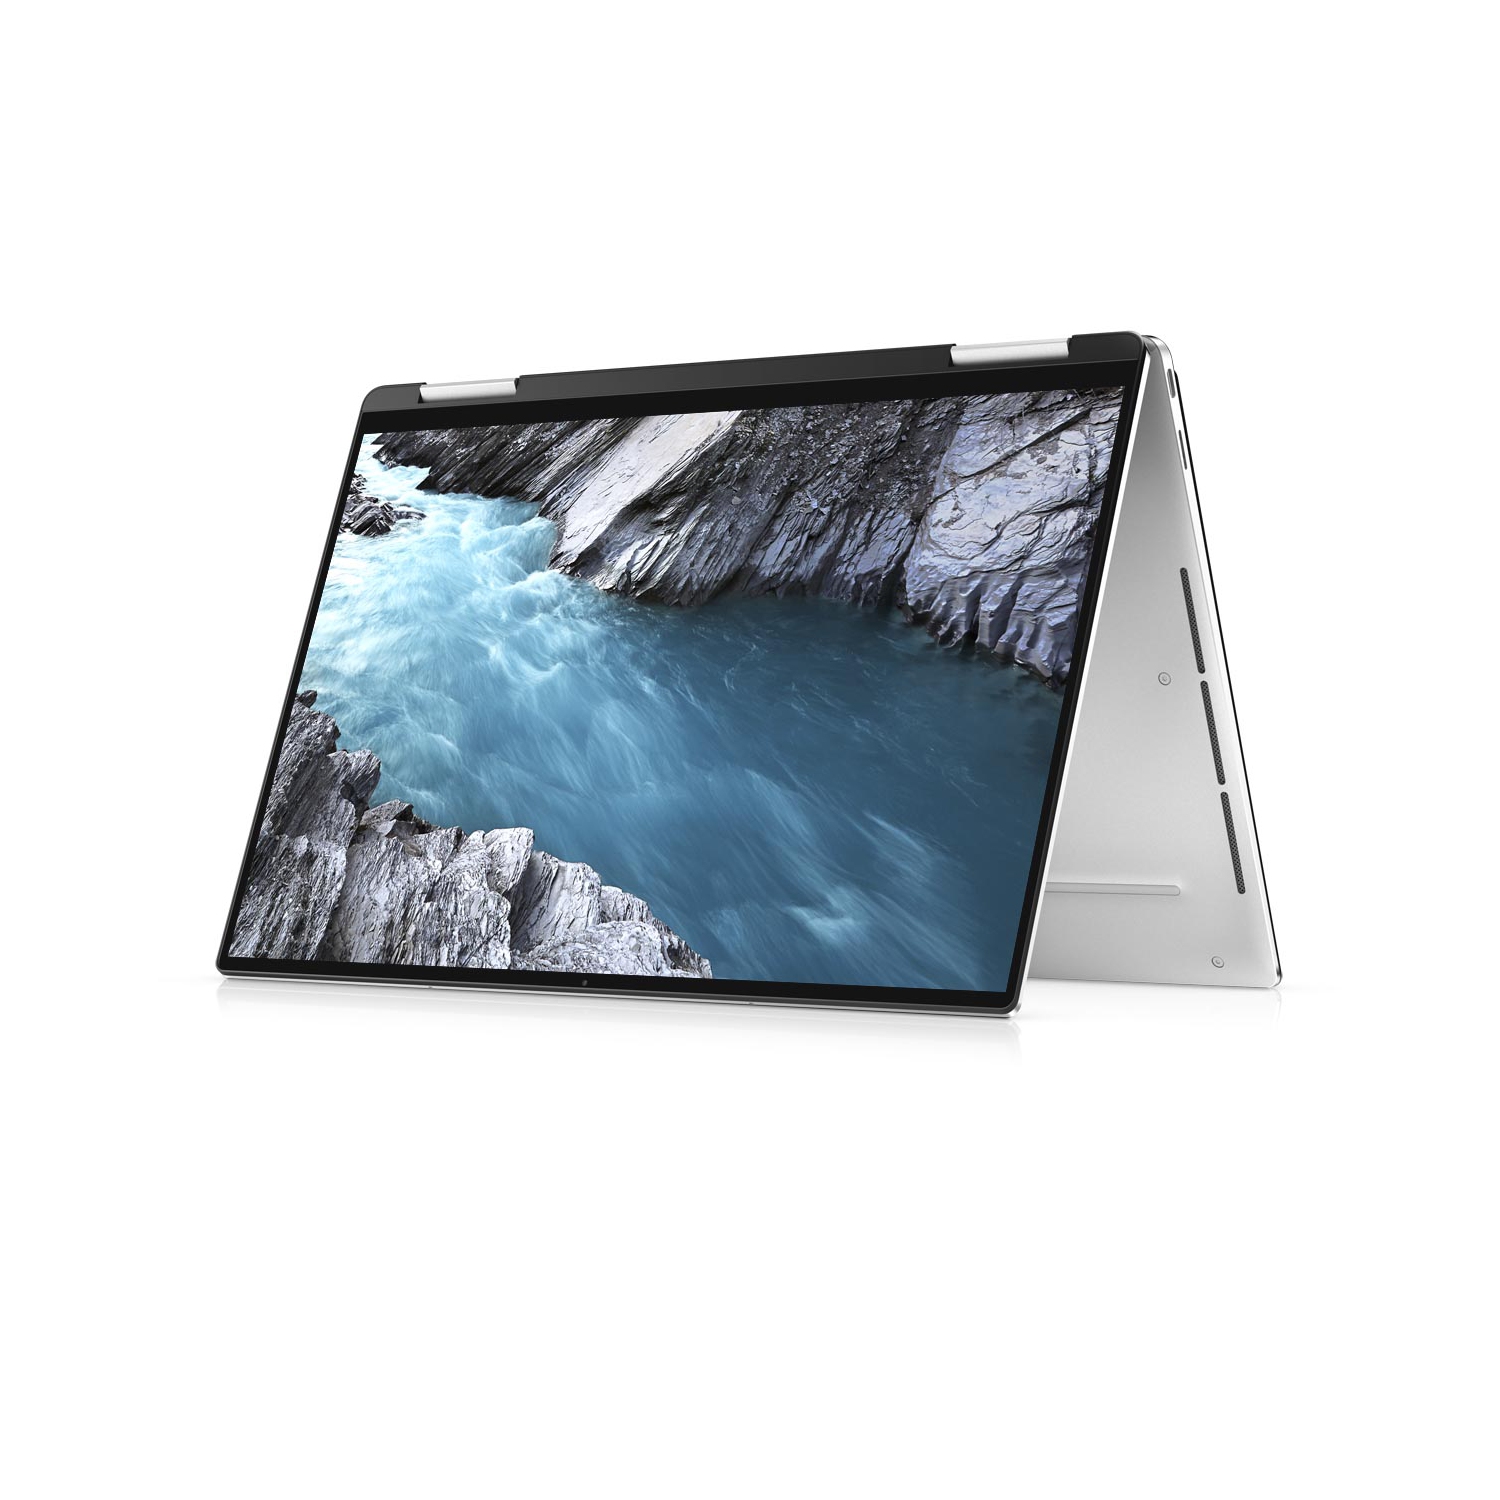 Refurbished (Excellent) - Dell XPS 13 7390 2-in-1 (2019) | 13.4" 4K Touch | Core i5 - 256GB SSD - 8GB RAM | 4 Cores @ 3.6 GHz - 10th Gen CPU Certified Refurbished